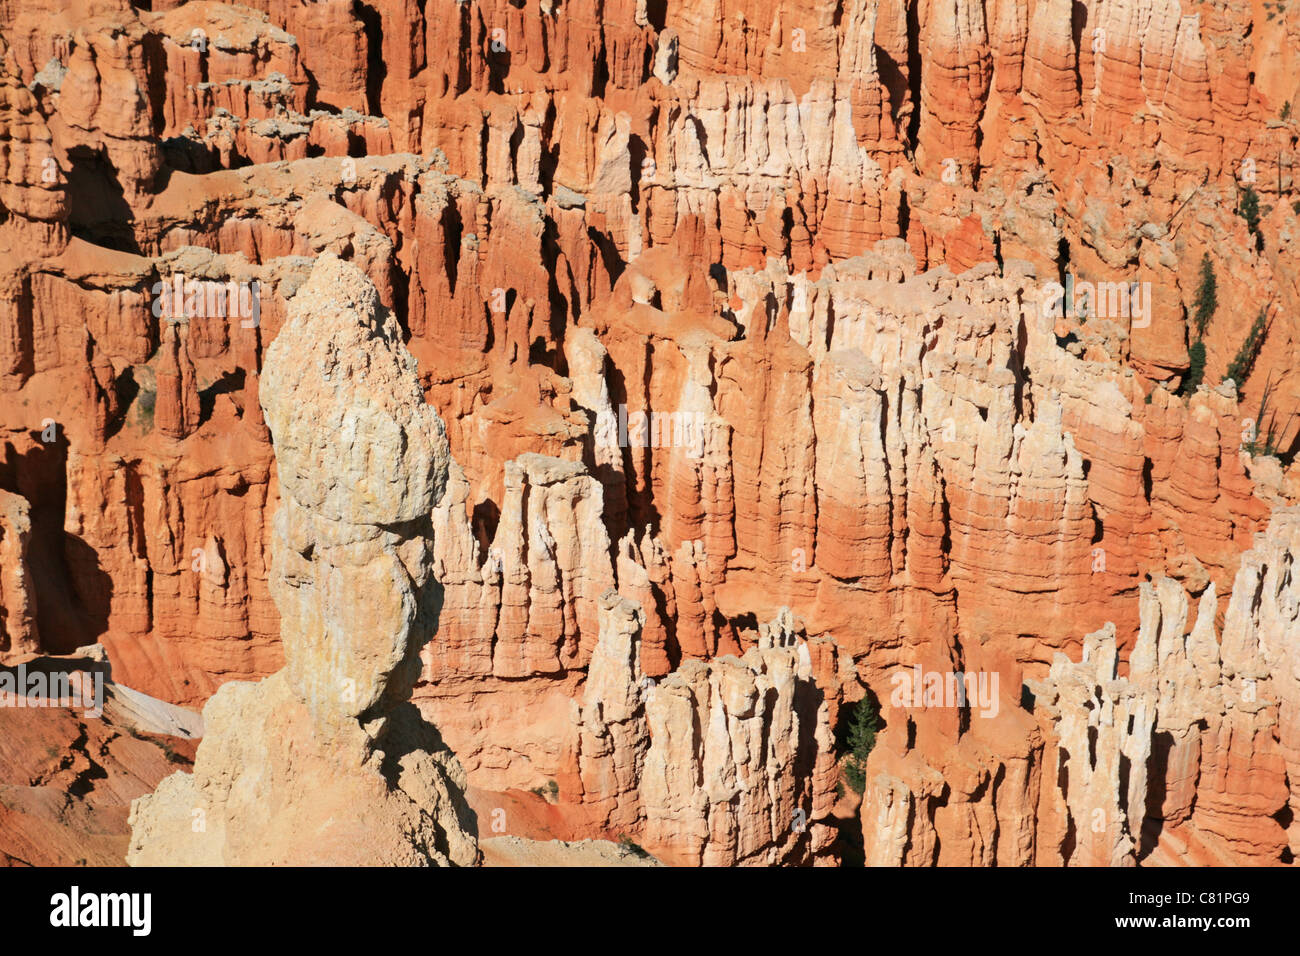 background of red sandstone hoodoos in Bryce Canyon National Park, Utah Stock Photo